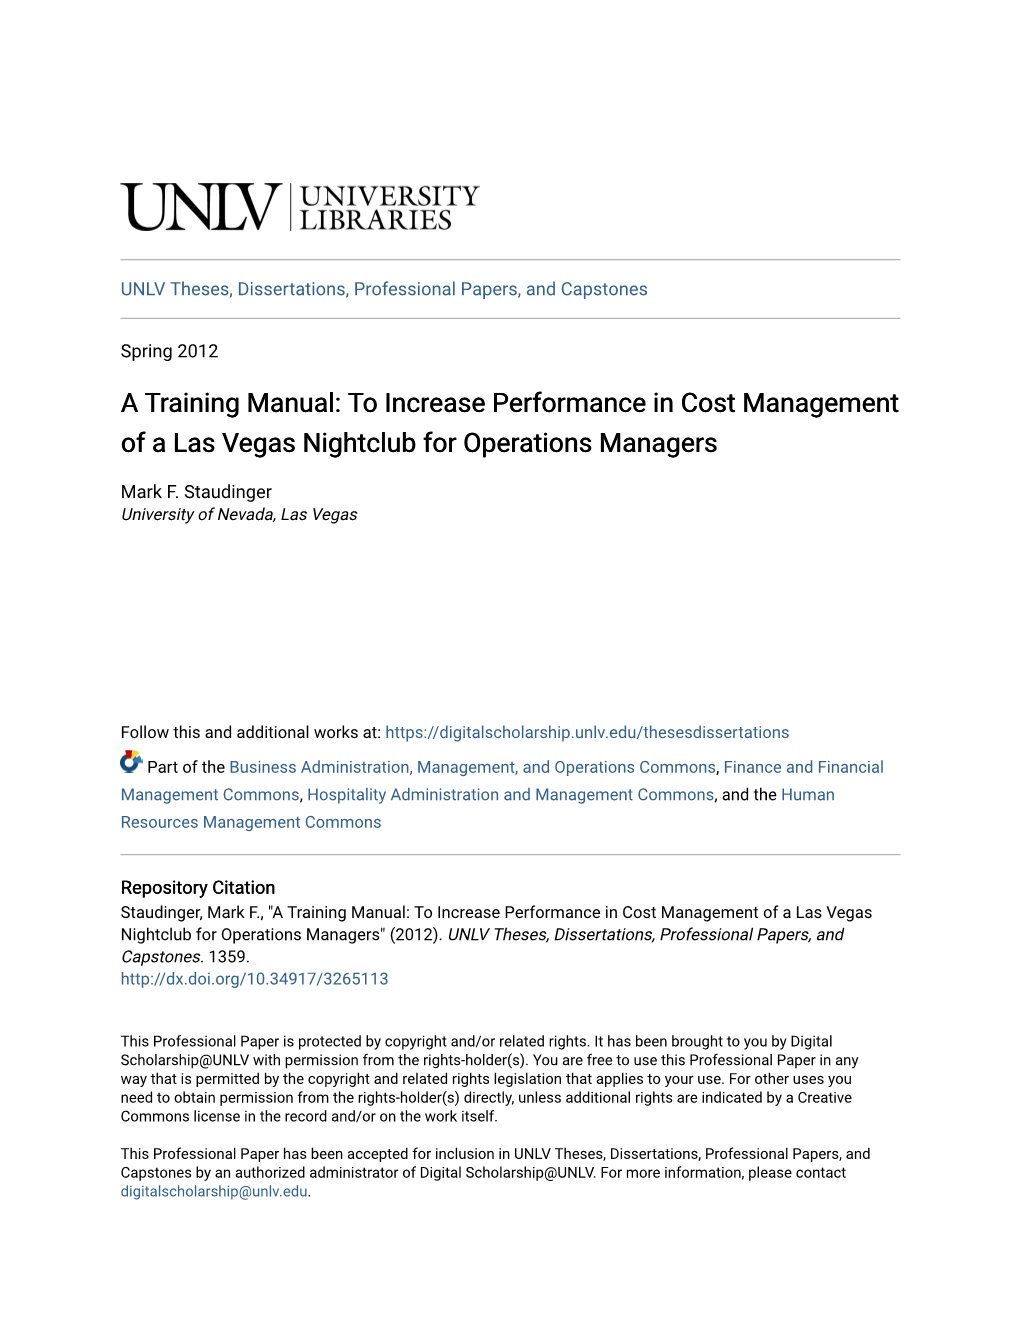 A Training Manual: to Increase Performance in Cost Management of a Las Vegas Nightclub for Operations Managers